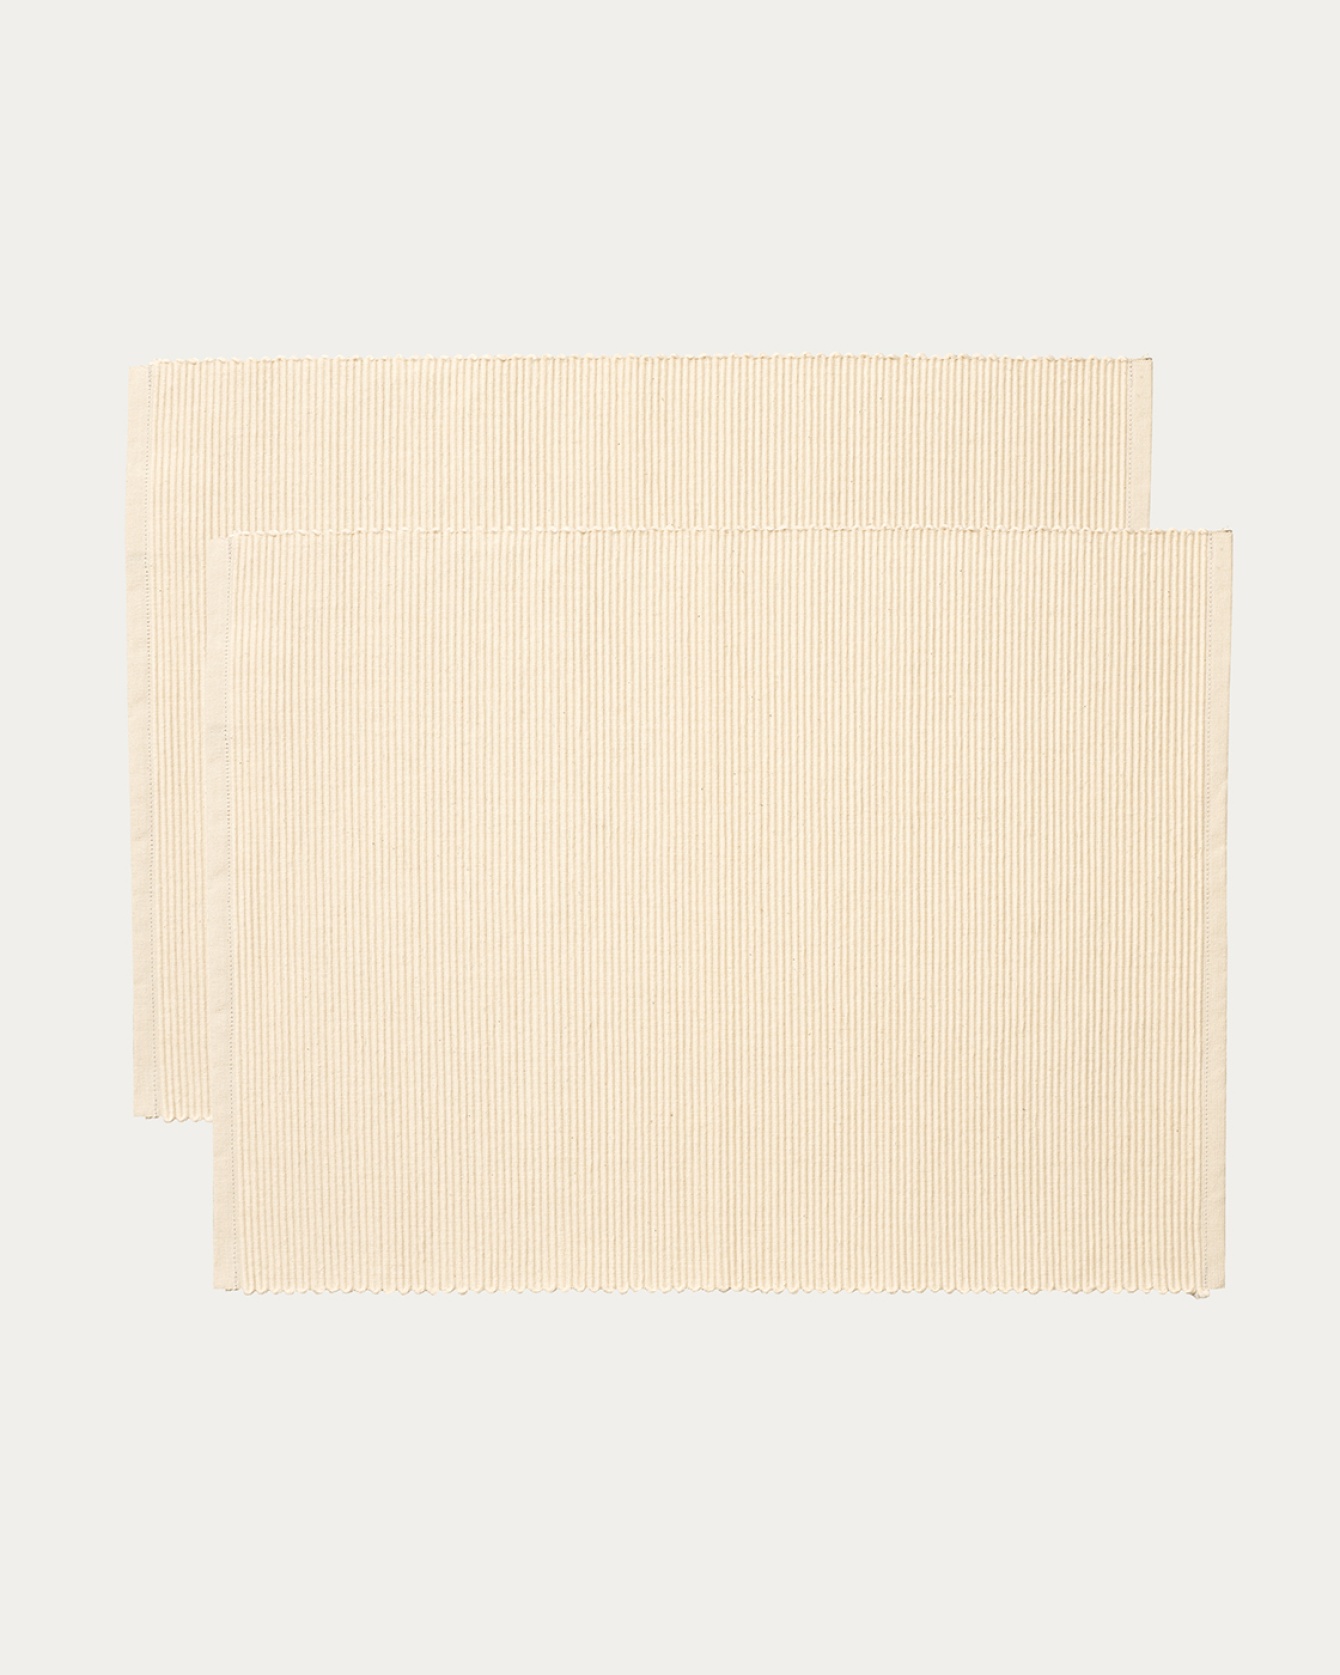 Product image creamy beige UNI placemat made of soft cotton in ribbed quality from LINUM DESIGN. Size 35x46 cm and sold in 2-pack.